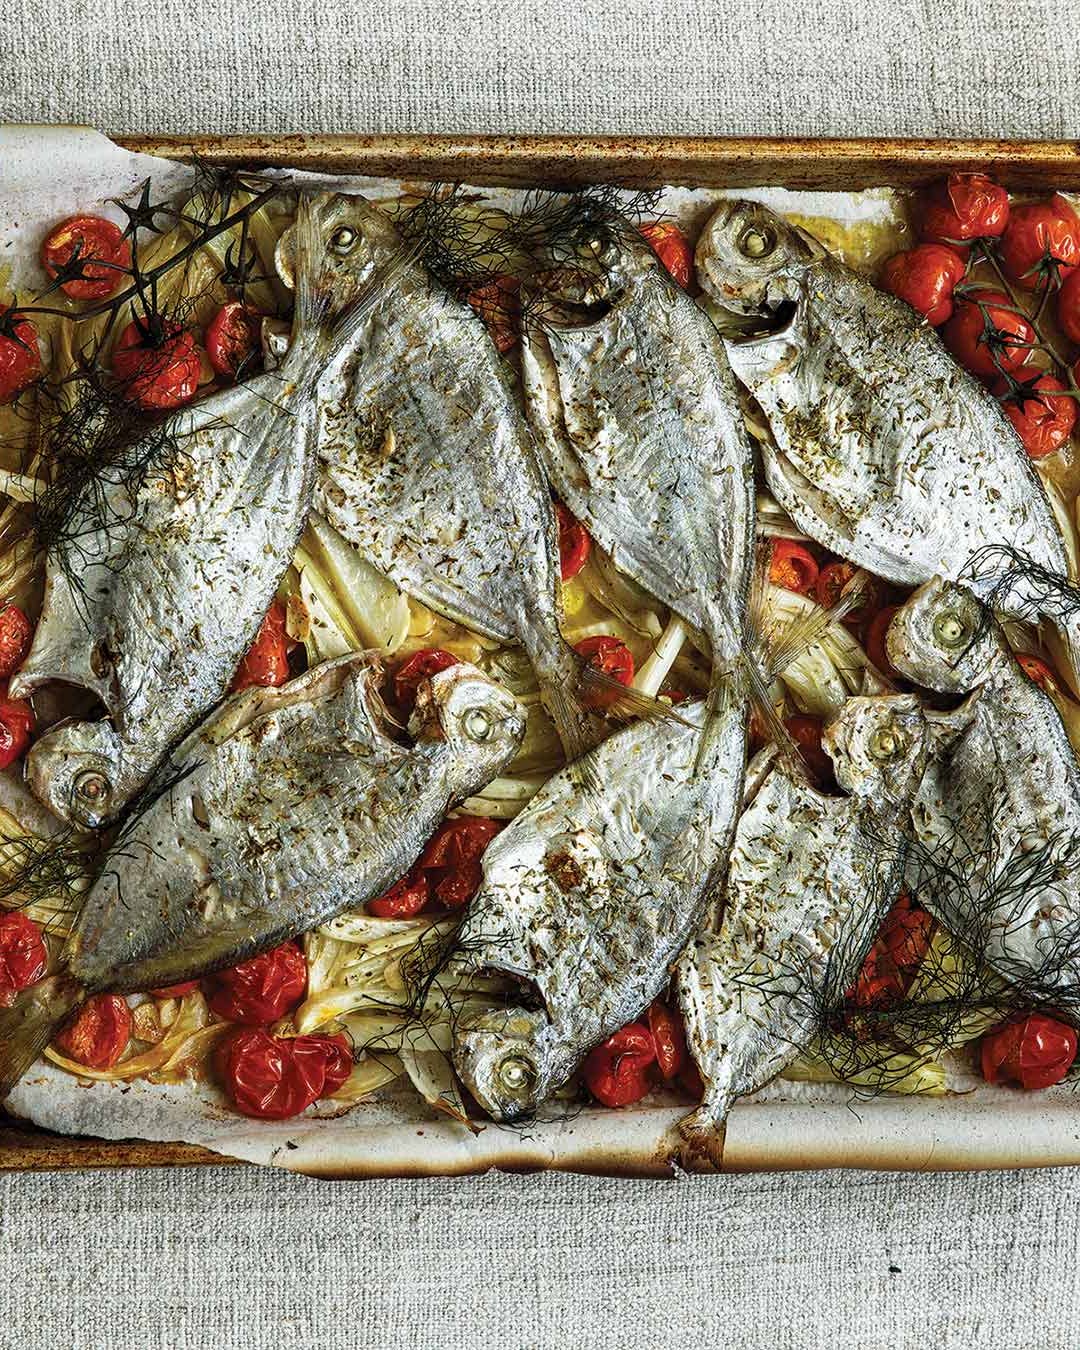 Oven-Roasted Whole Fish with Tomatoes and Fennel